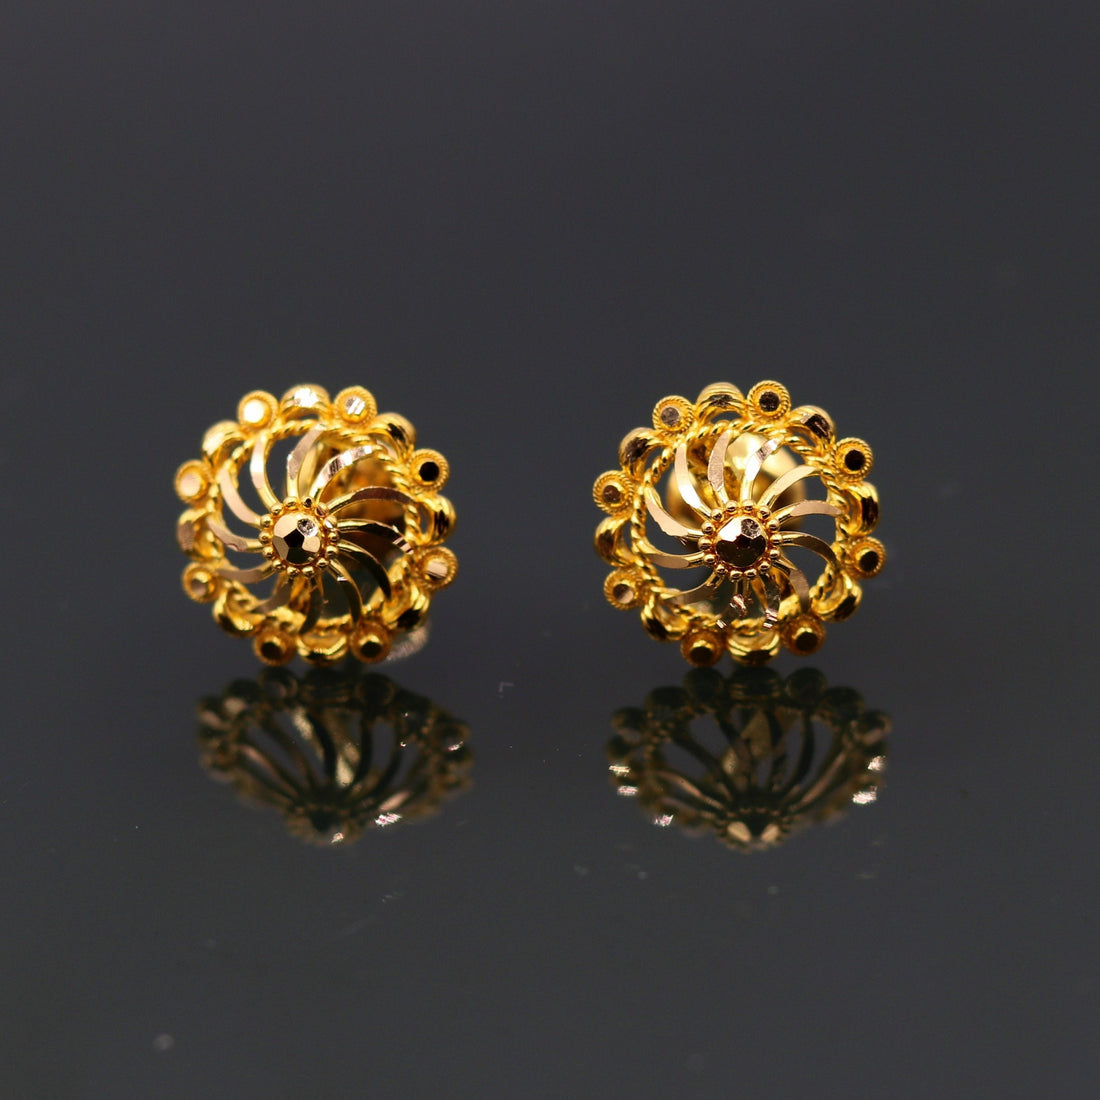 22kt yellow gold handmade stud earrings amazing filigree work solid earrings stylish modern jewelry from india - TRIBAL ORNAMENTS